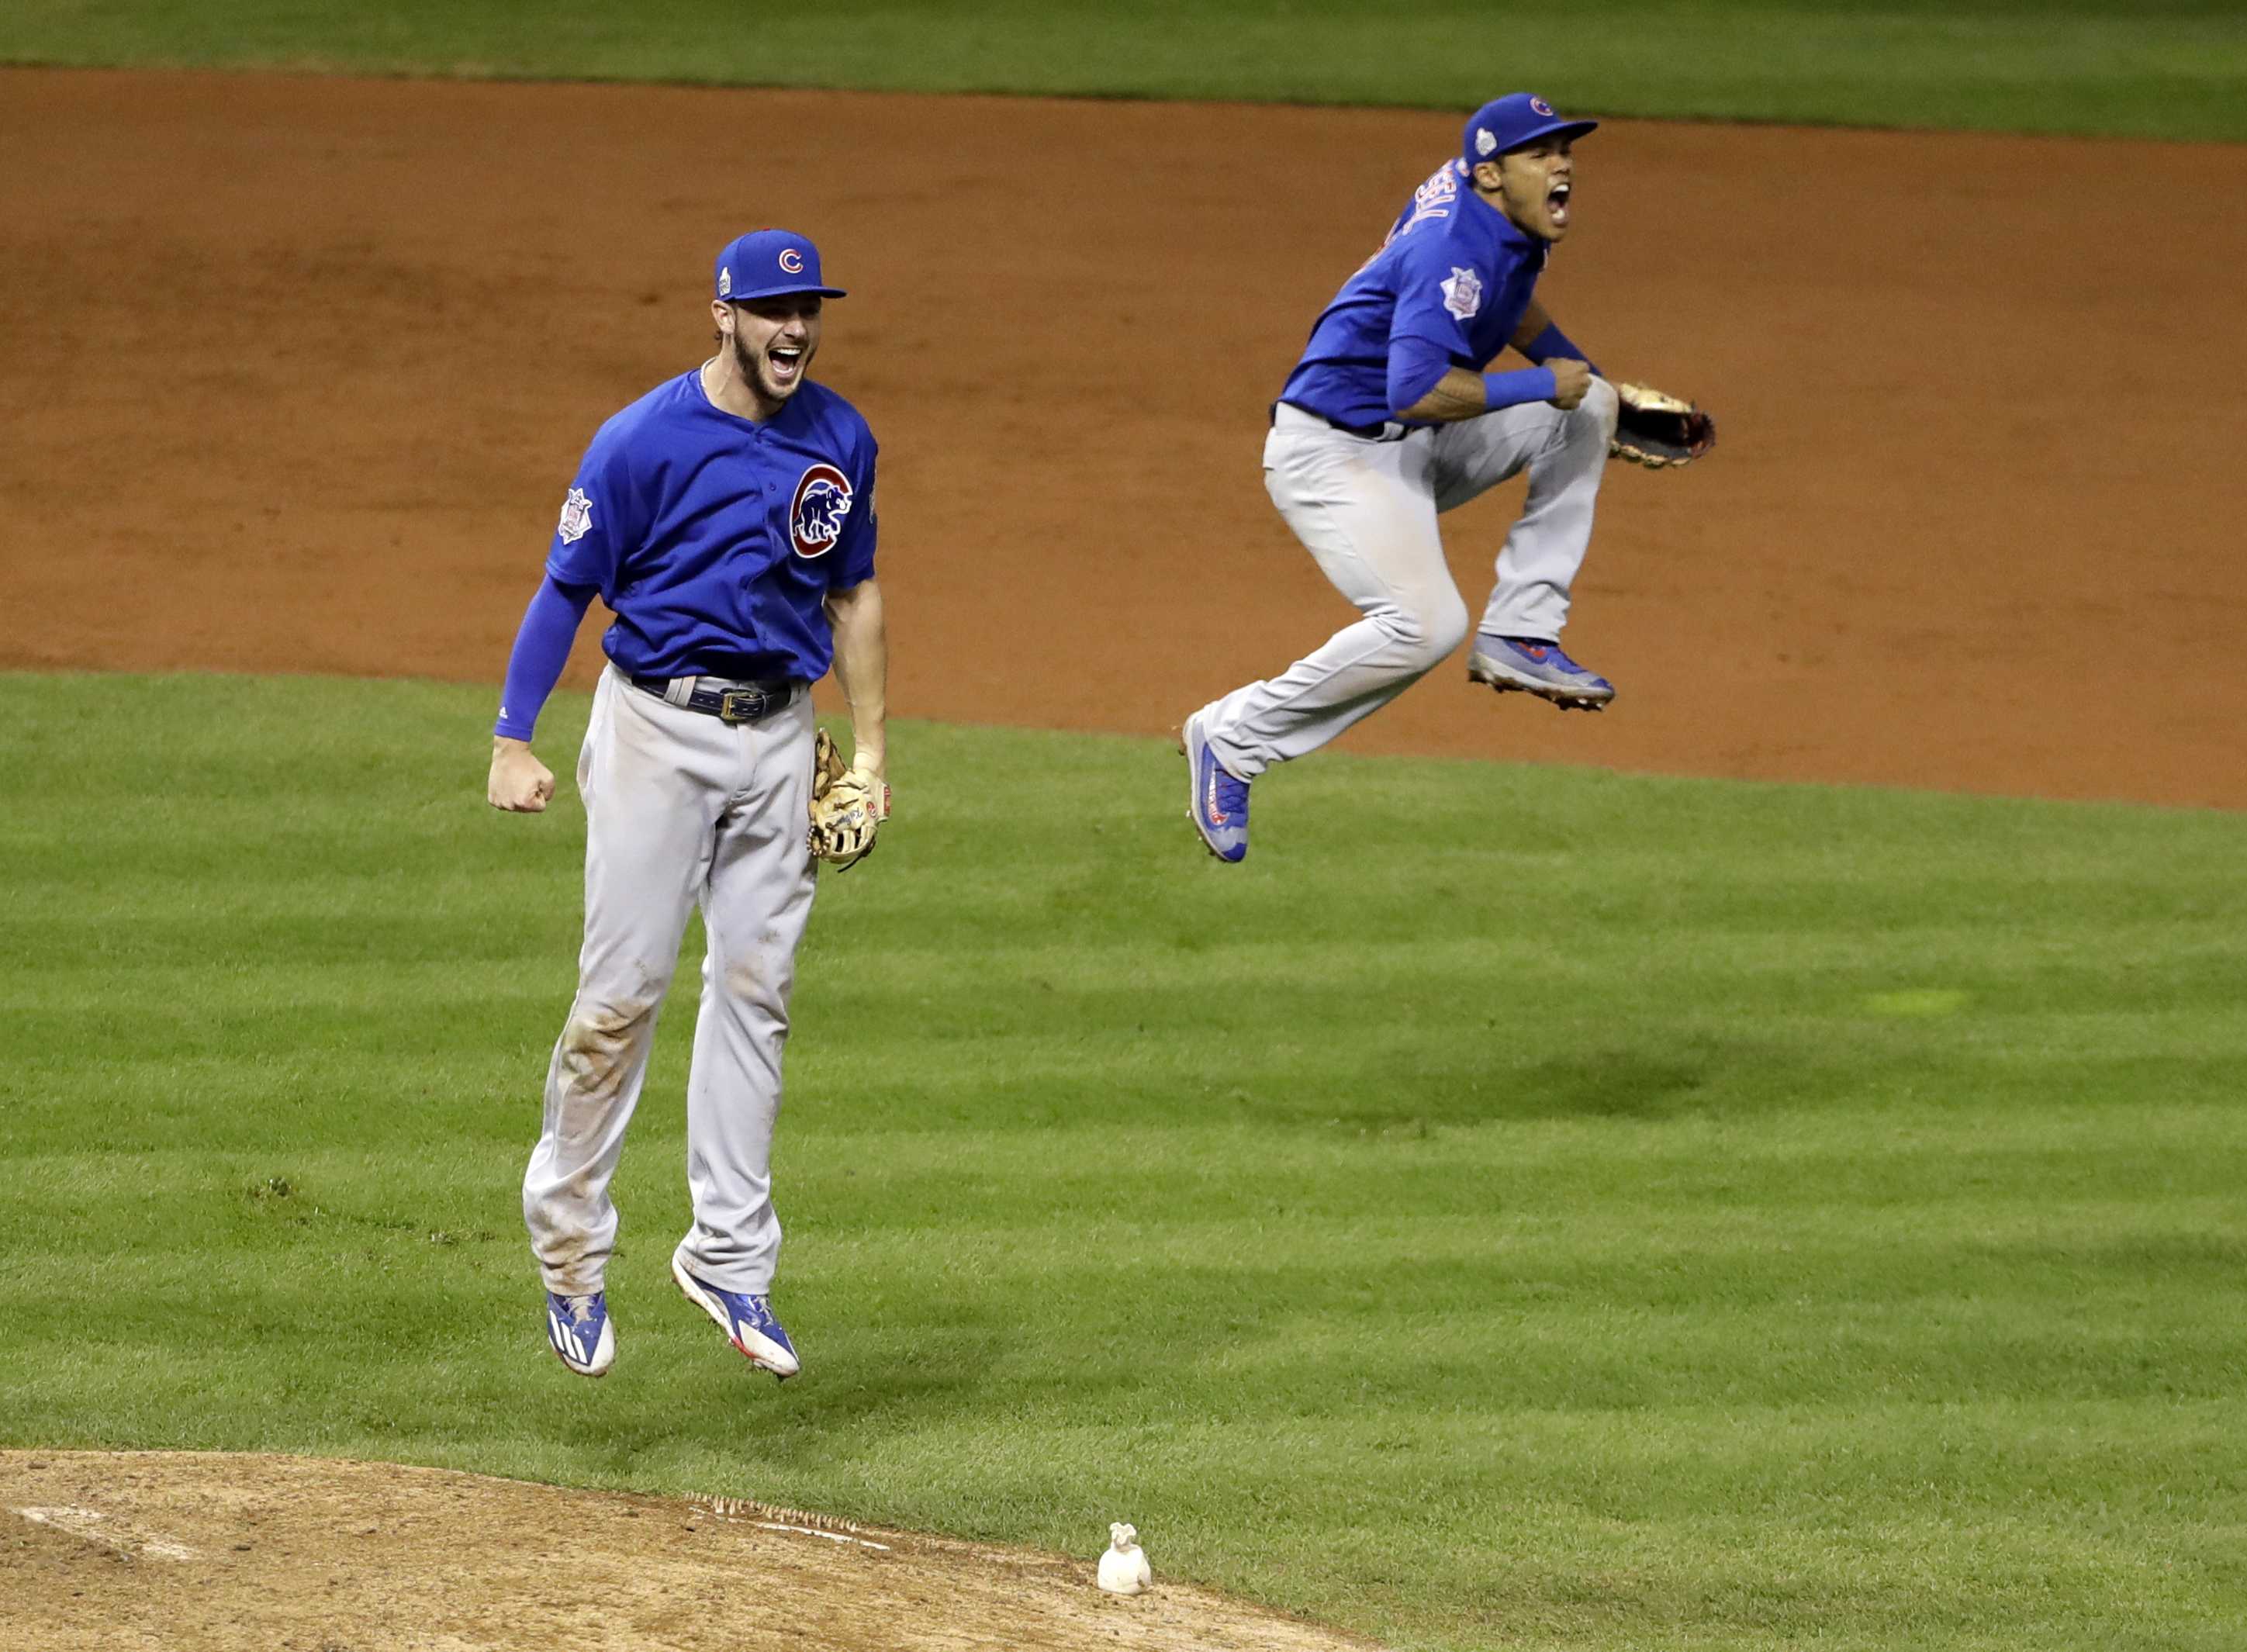 Chicago Cubs' Kris Bryant, left, and Addison Russell celebrate after Game 7 of the Major League Baseball World Series against the Cleveland Indians Thursday, Nov. 3, 2016, in Cleveland. The Cubs won 8-7 in 10 innings to win the series 4-3. (AP Photo/David J. Phillip)